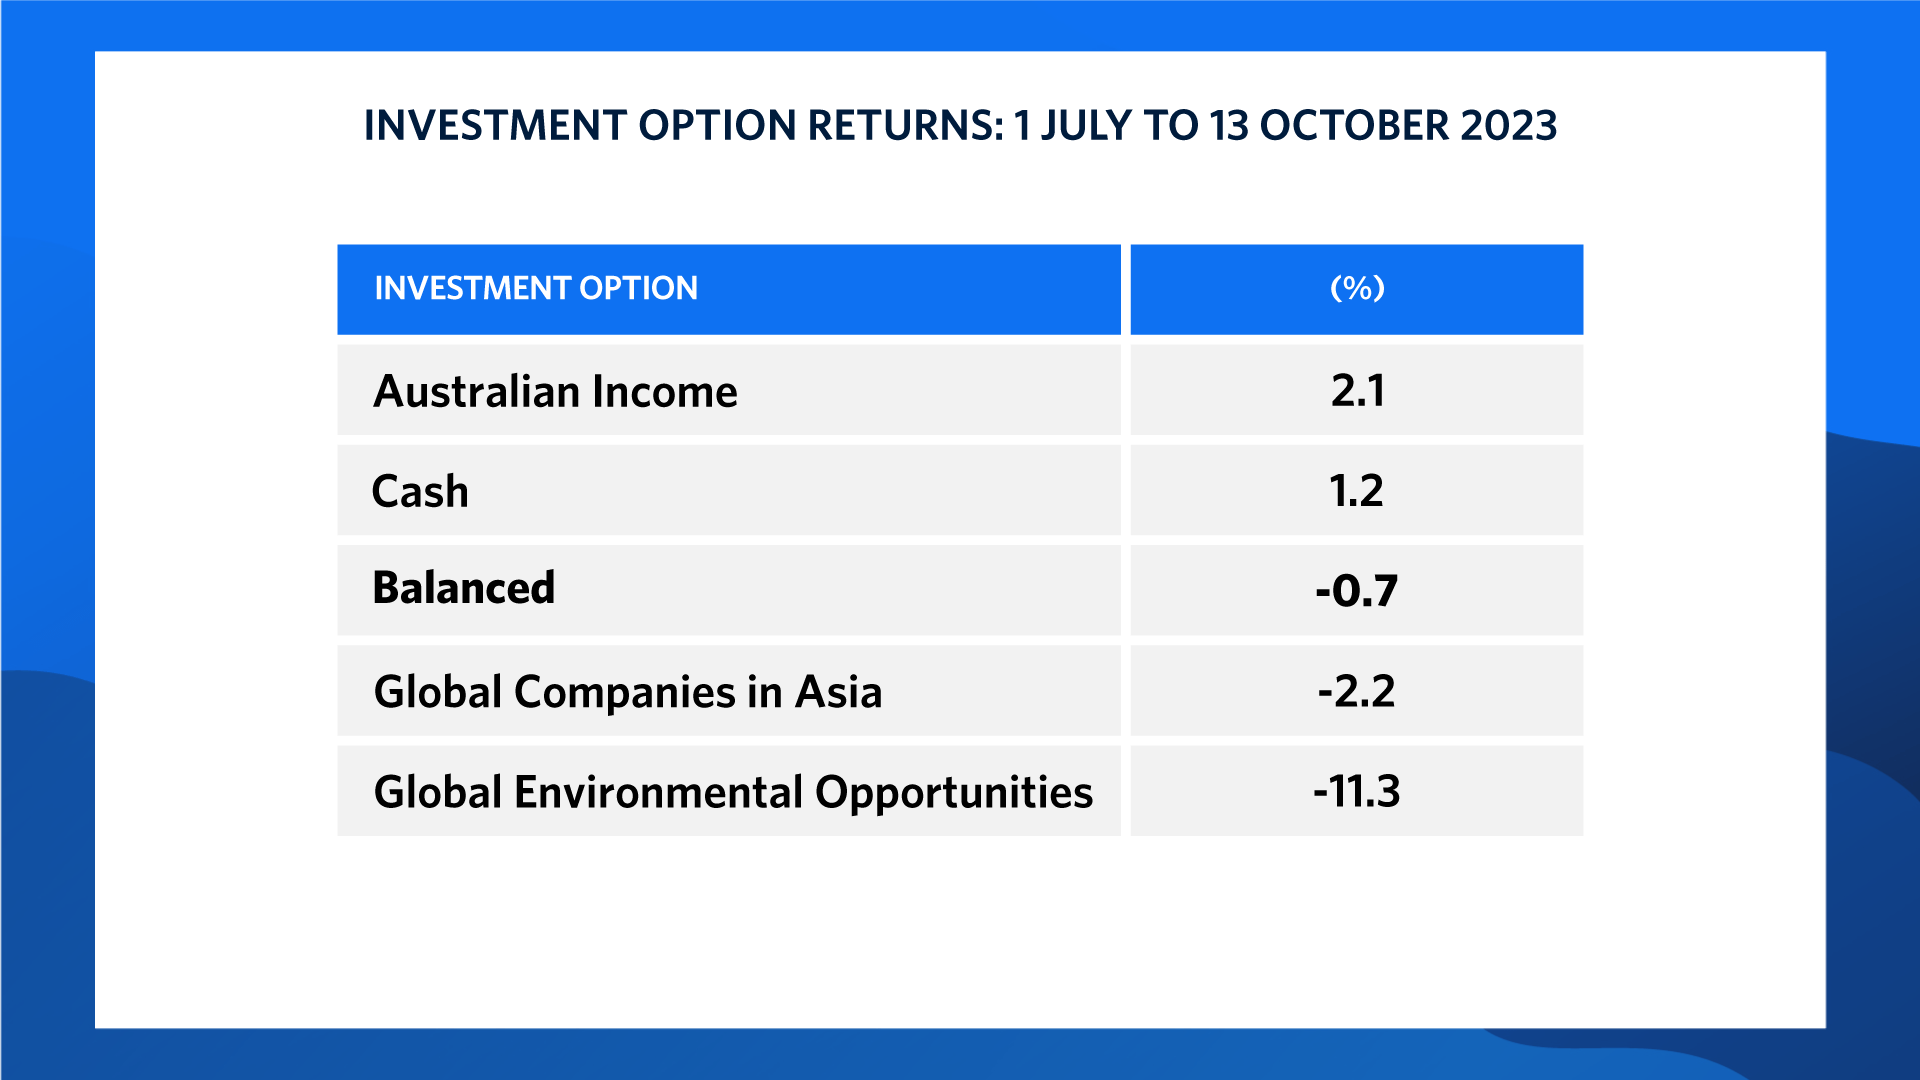 Chart 2: A table showing returns for various UniSuper investment options for the period 1 July to 13 October 2023: Australian Income (2.1%); Cash (1.2%); Balanced (-0.7%); Global Companies in Asia (-2.2%); Global Environmental Opportunities (-11.3%).